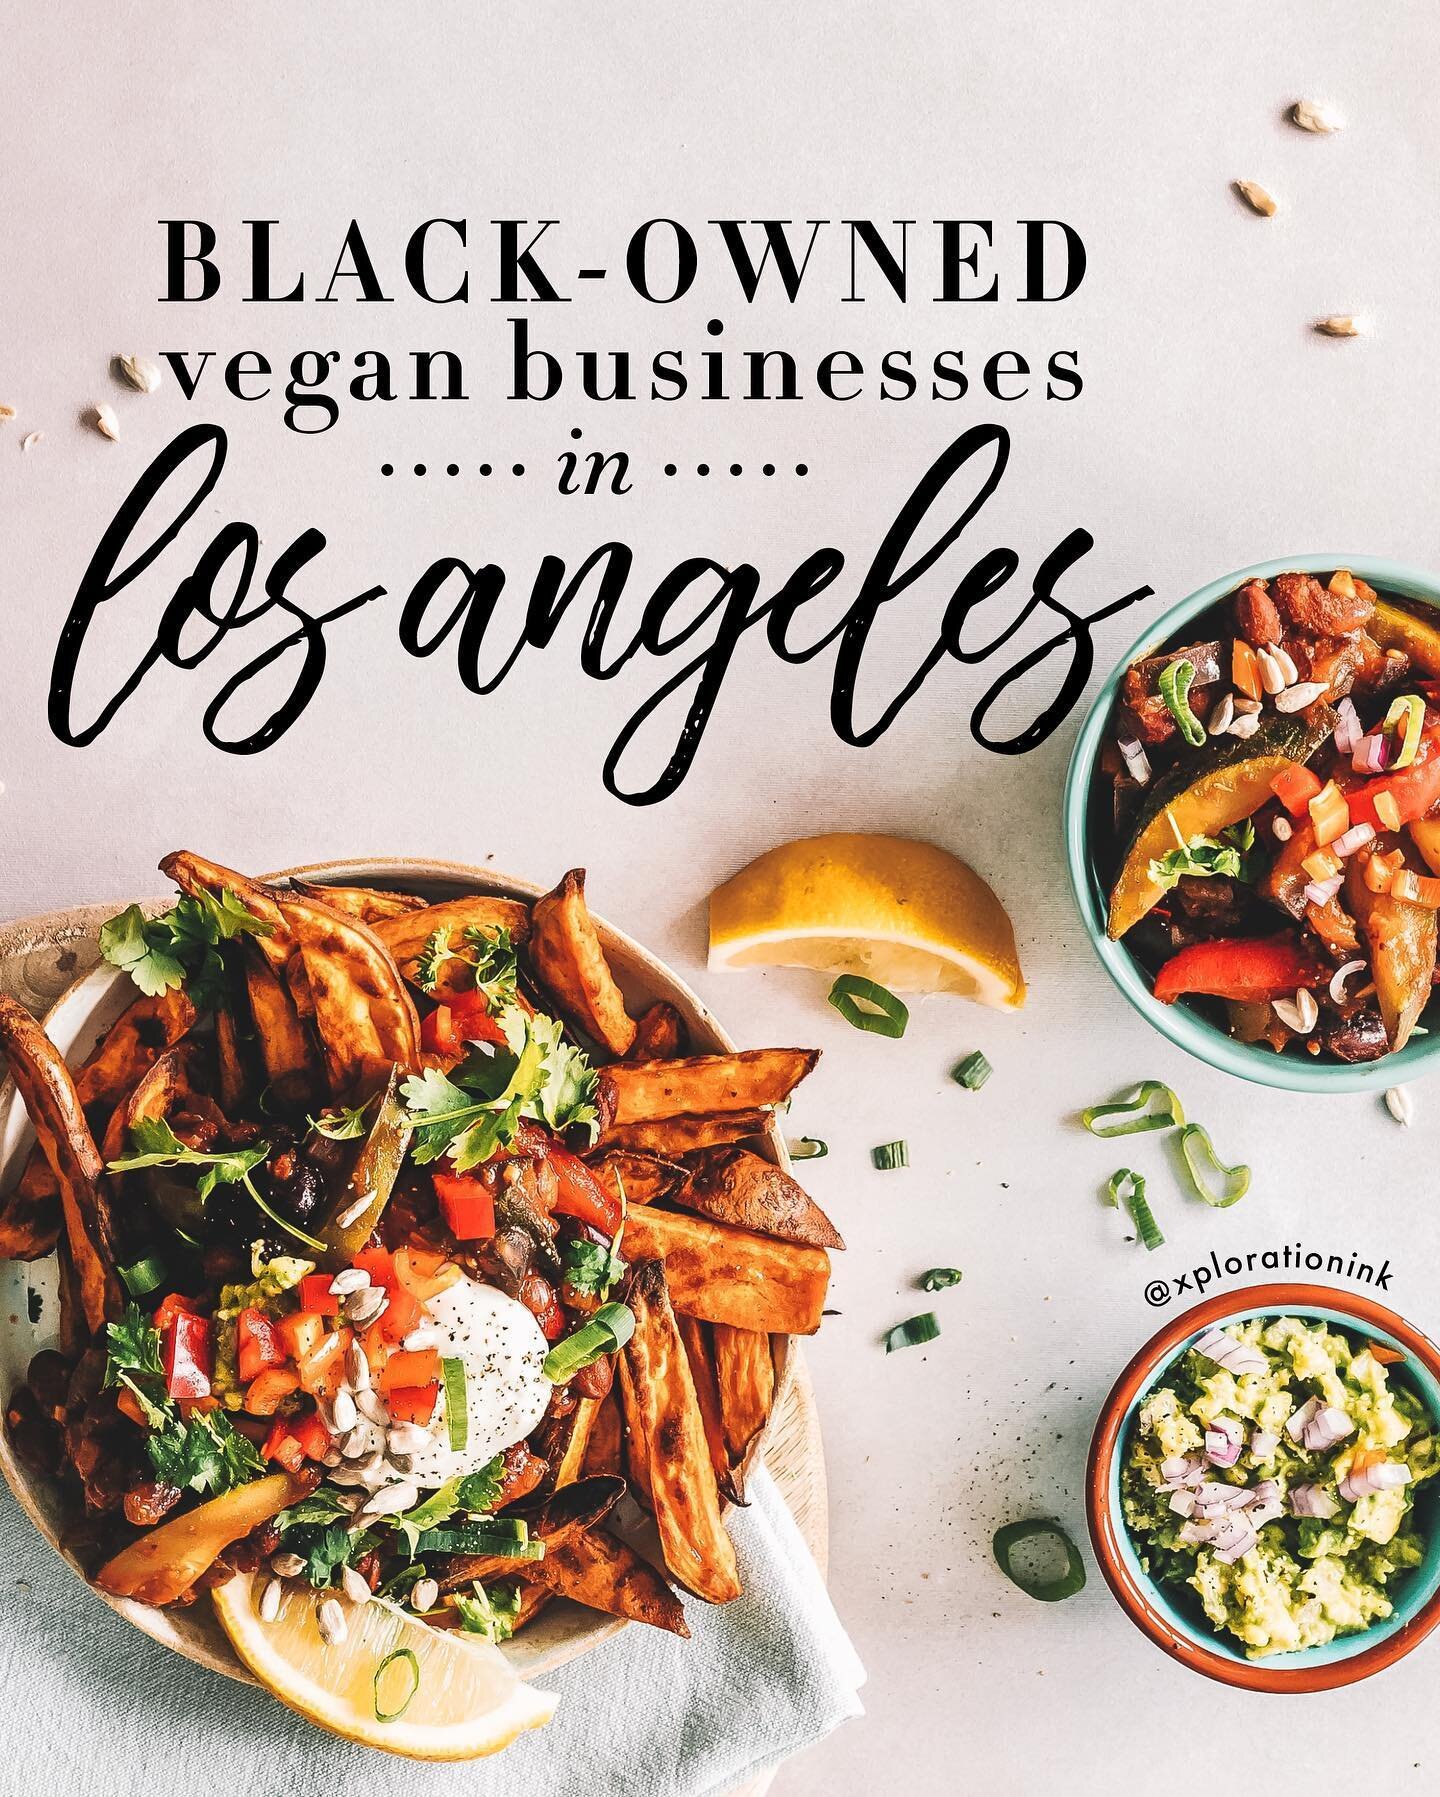 To my LA peeps, I curated five Black-owned vegan spots in Los Angeles to help support businesses in our Black community and Mama Earth too. Let&rsquo;s start locally to make an impact globally. These delicious spots are vegan and vegan friendly so sw